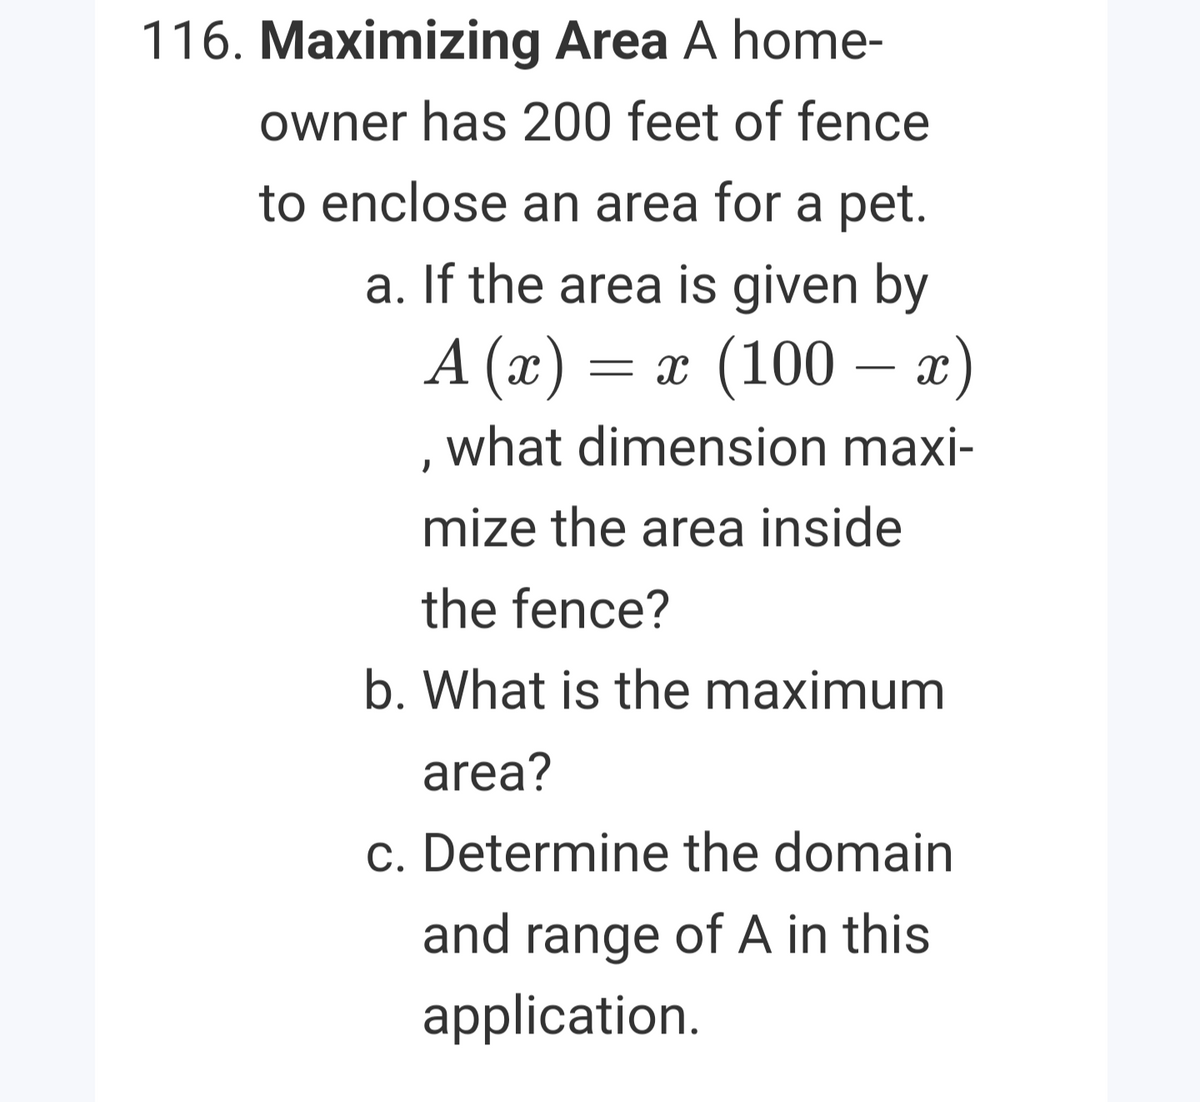 116. Maximizing Area A home-
owner has 200 feet of fence
to enclose an area for a pet.
a. If the area is given by
A (x) = x (100 – x)
, what dimension maxi-
mize the area inside
the fence?
b. What is the maximum
area?
c. Determine the domain
and range of A in this
application.
